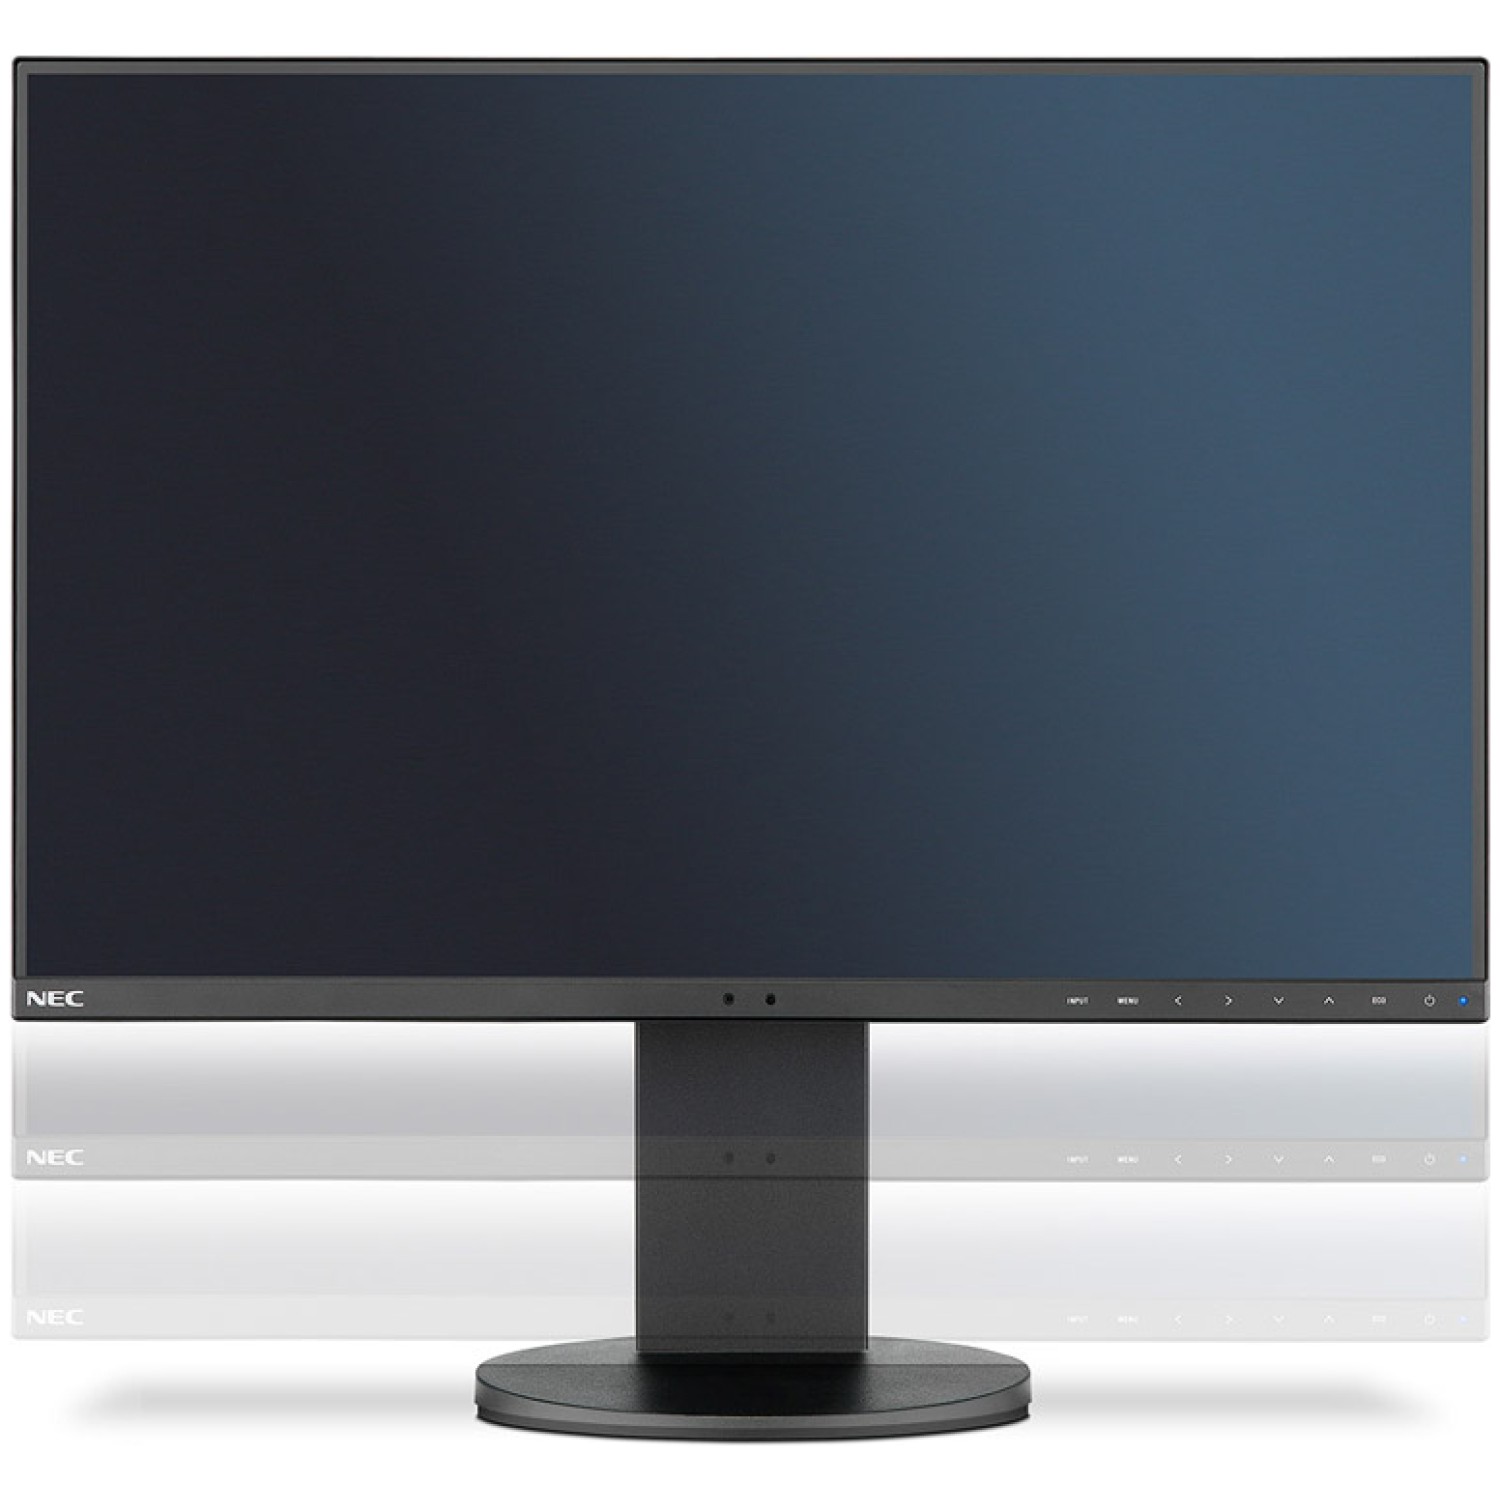 47cm (24") FHD IPS TFT WLED LCD monitor